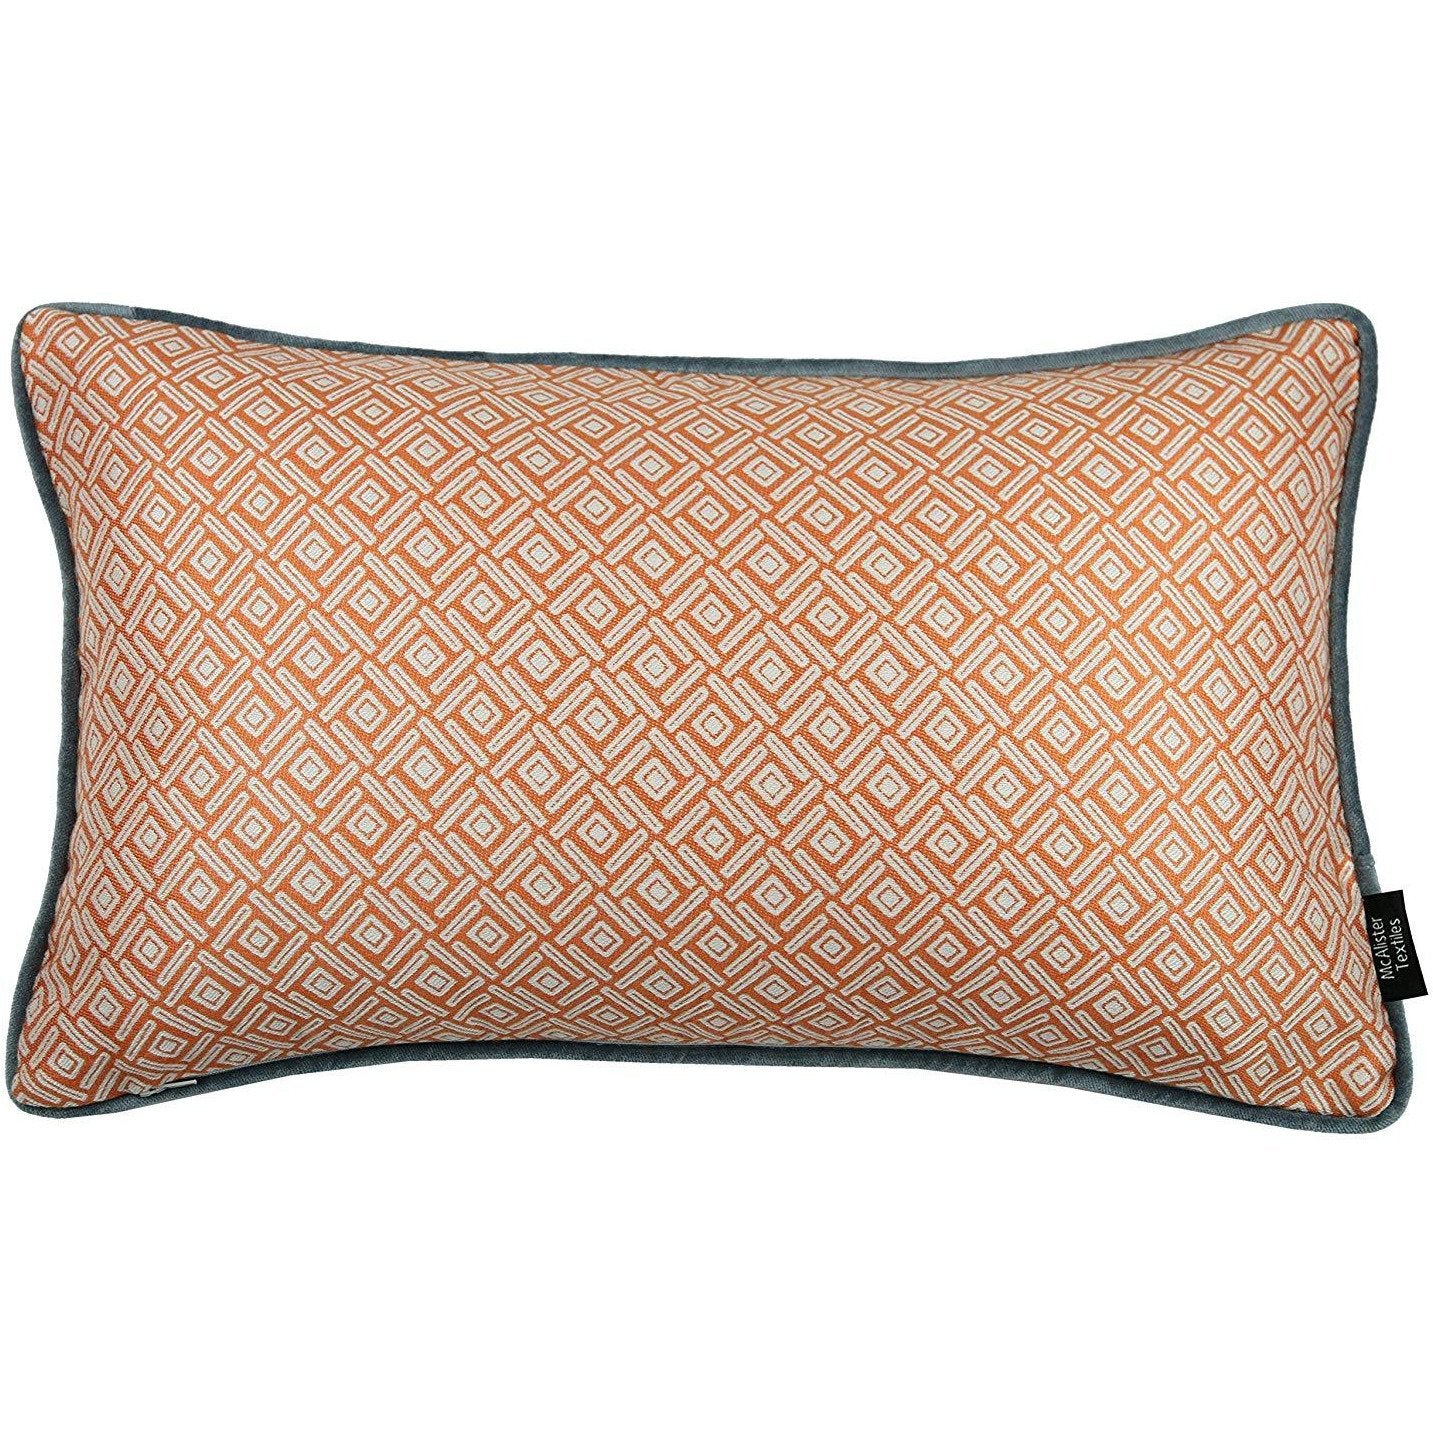 McAlister Textiles Elva Geometric Burnt Orange Cushion Cushions and Covers Cover Only 50cm x 30cm 